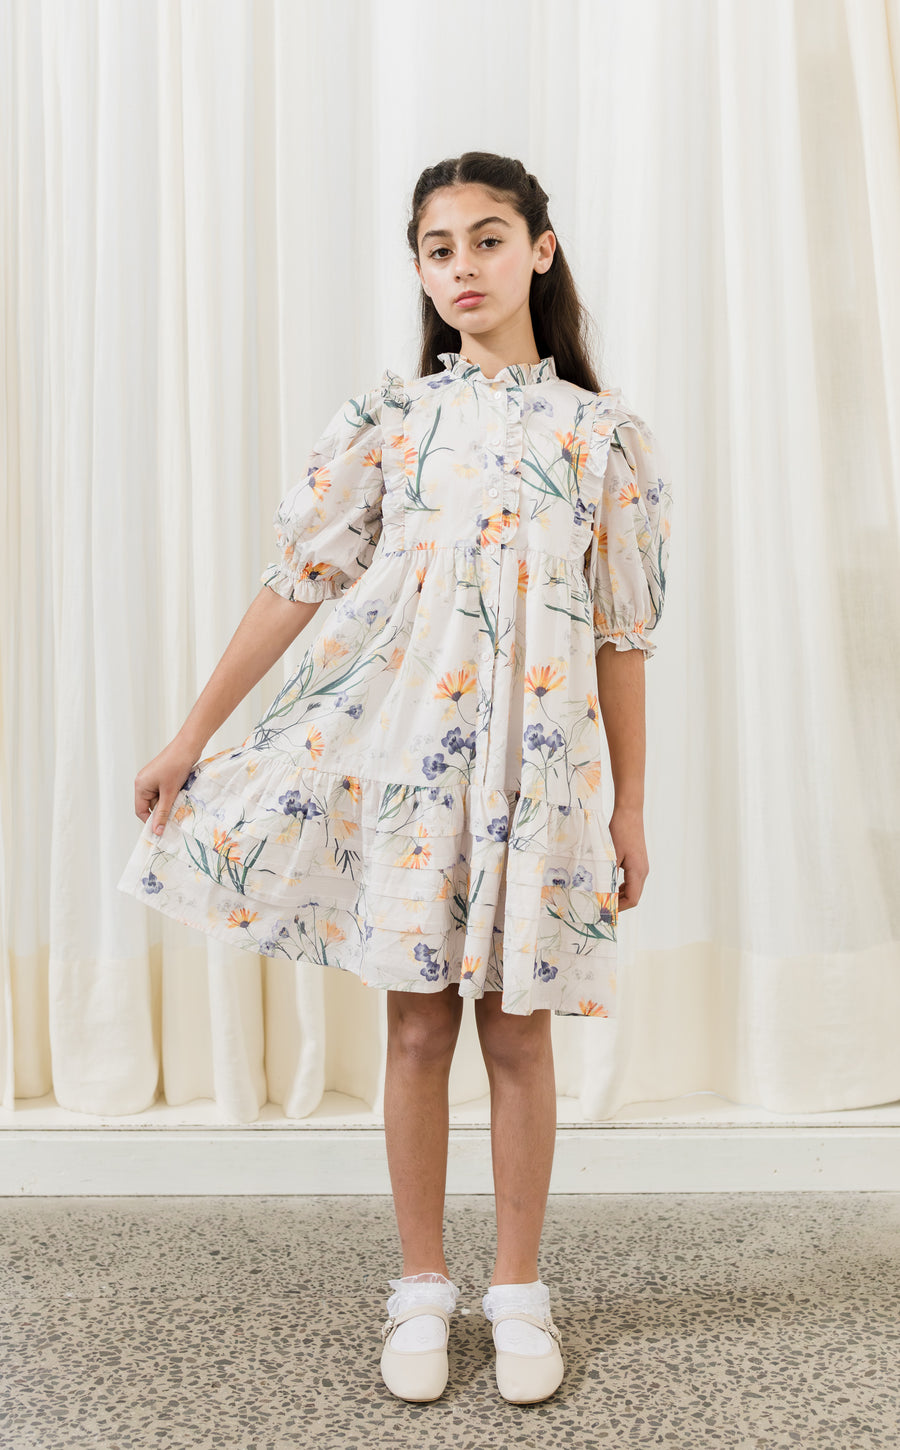 Scallop spring print voile dress by Petite Amalie